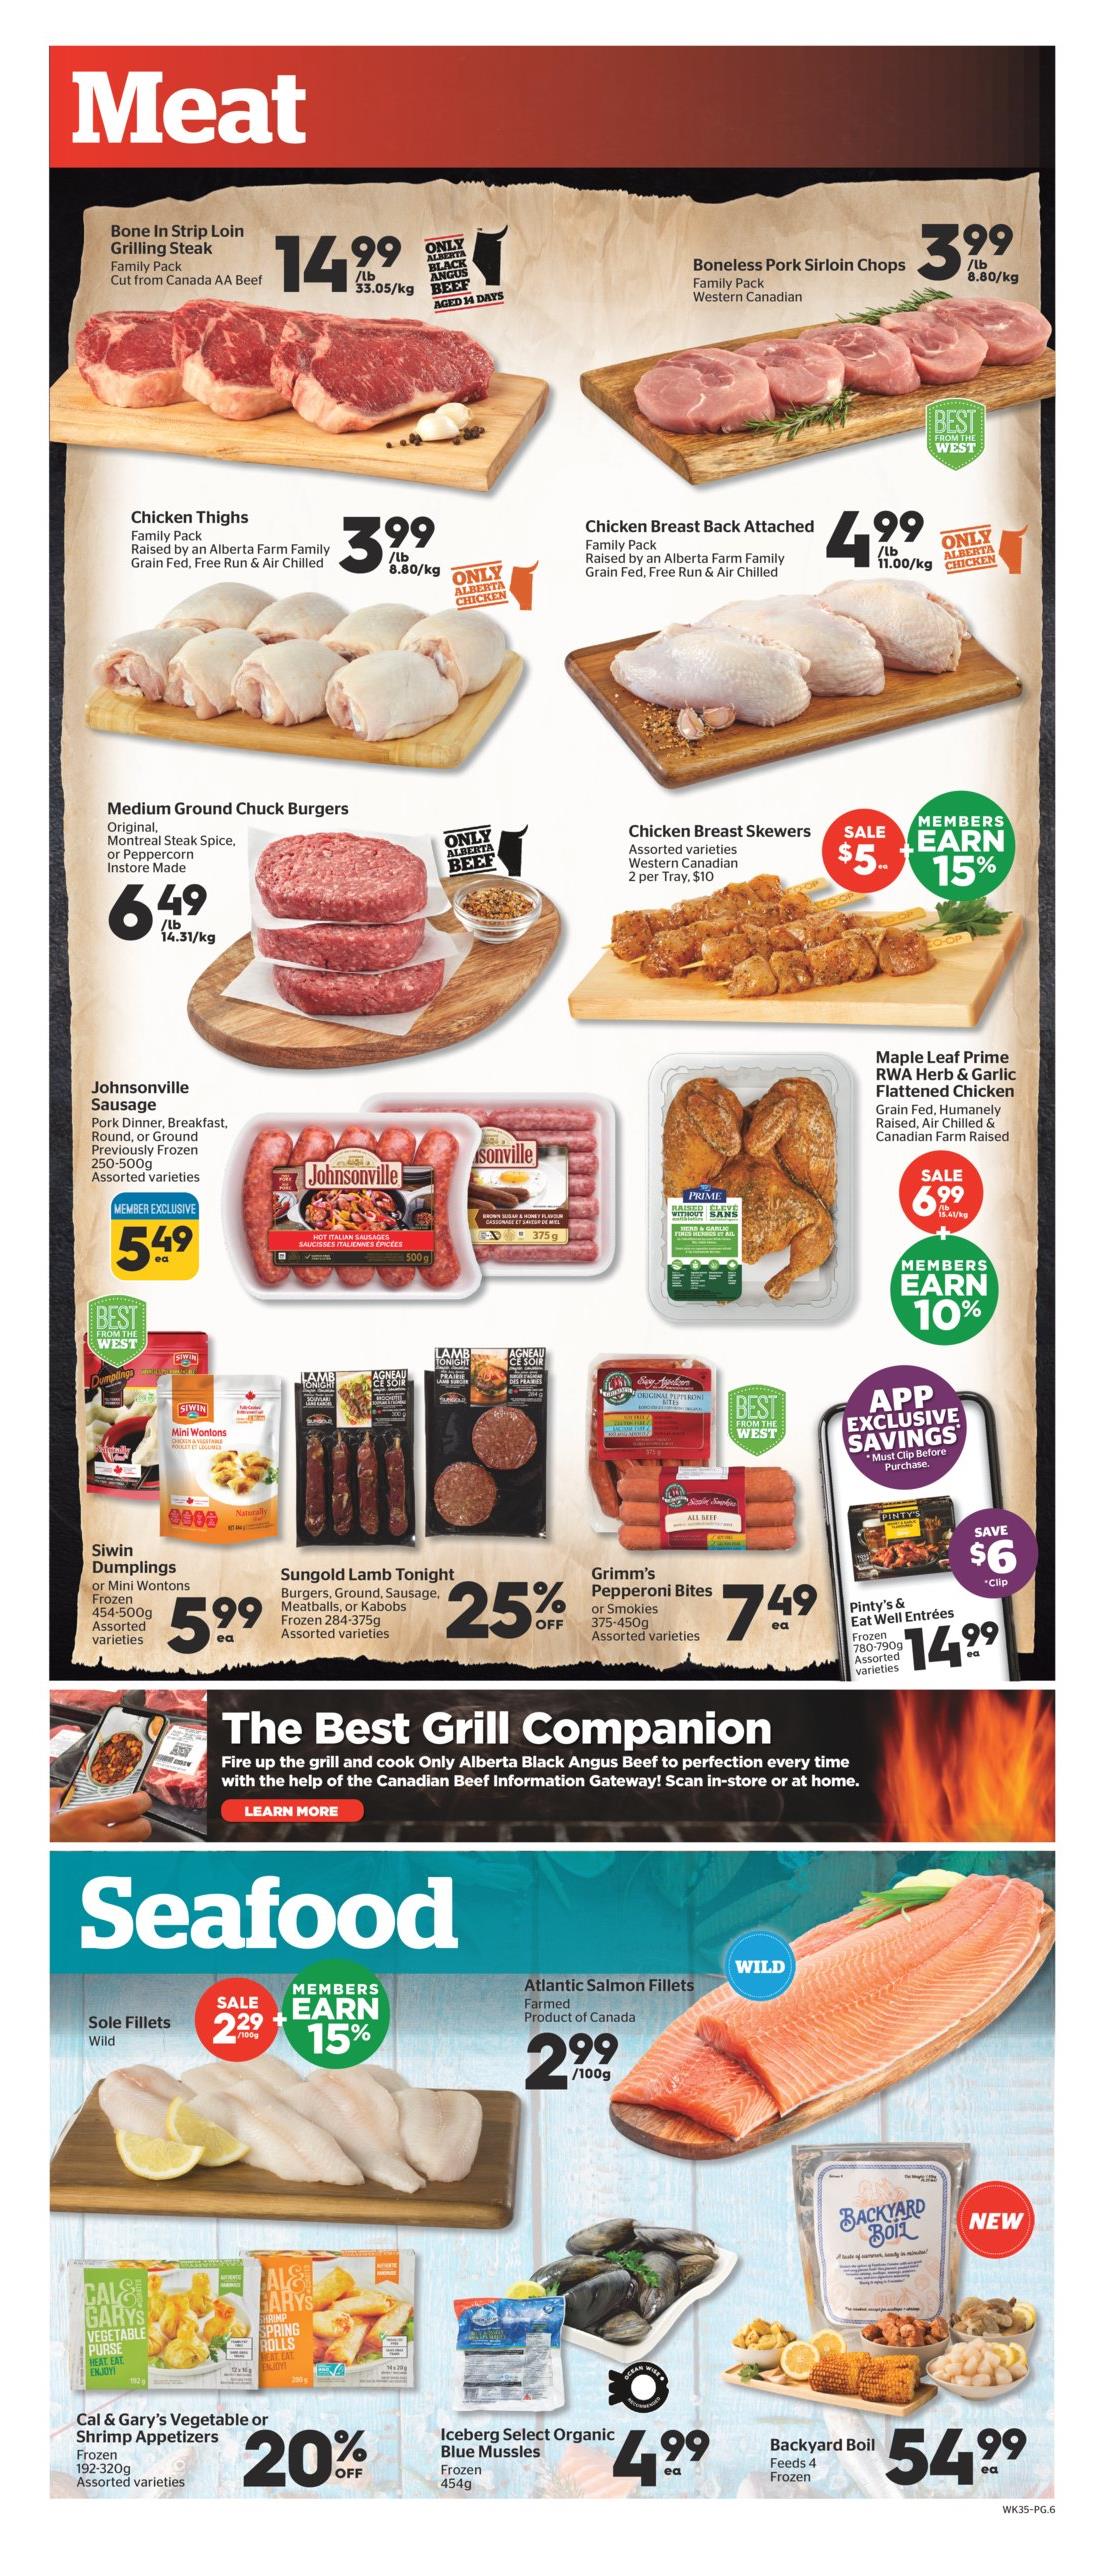 Calgary Co-op - Weekly Flyer Specials - Page 6